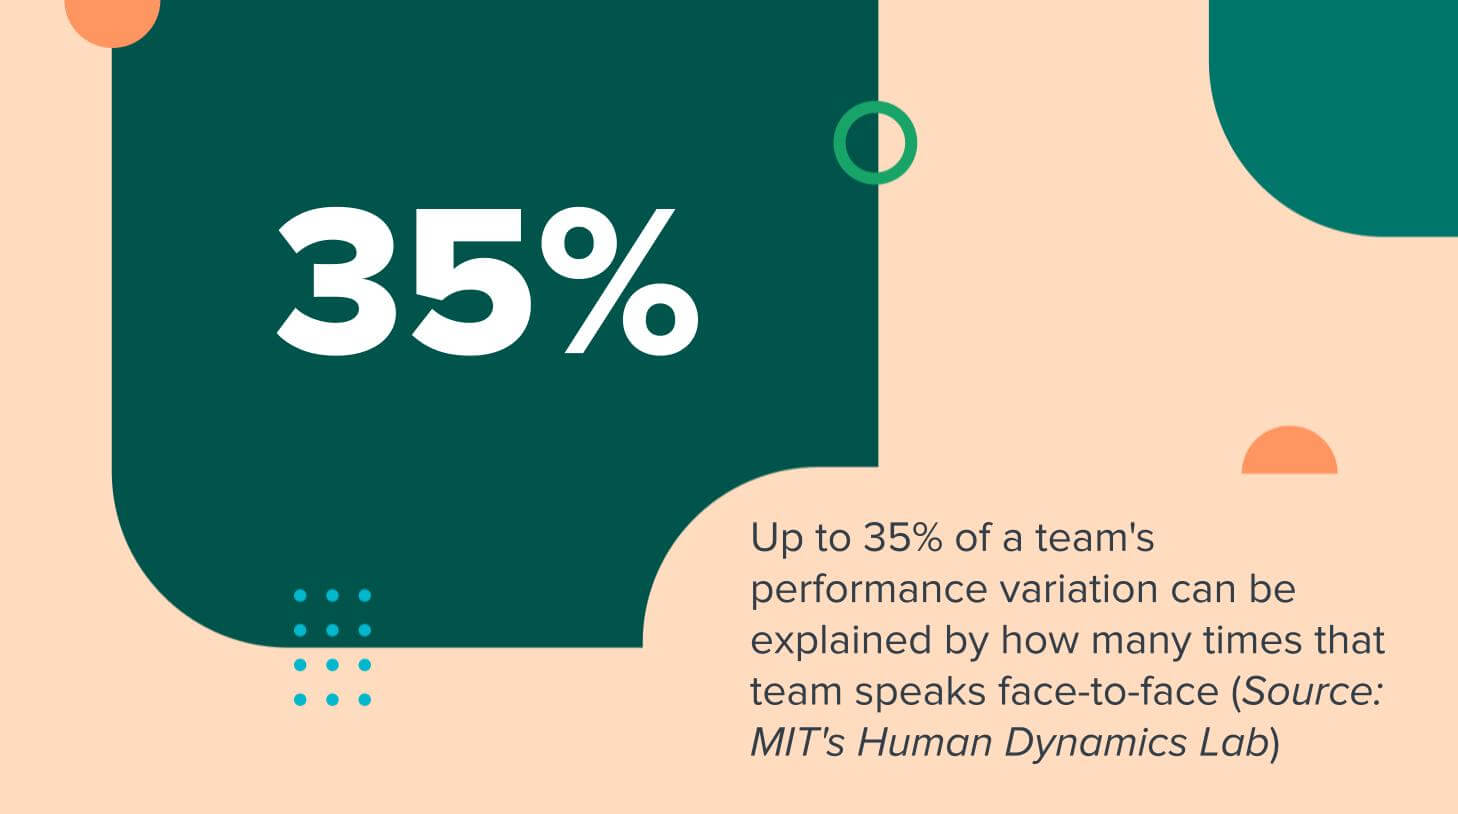 Up to 35% of a team's performance variation can be explained by how many times that team speaks face-to-face (Source: MIT's Human Dynamics Lab) 